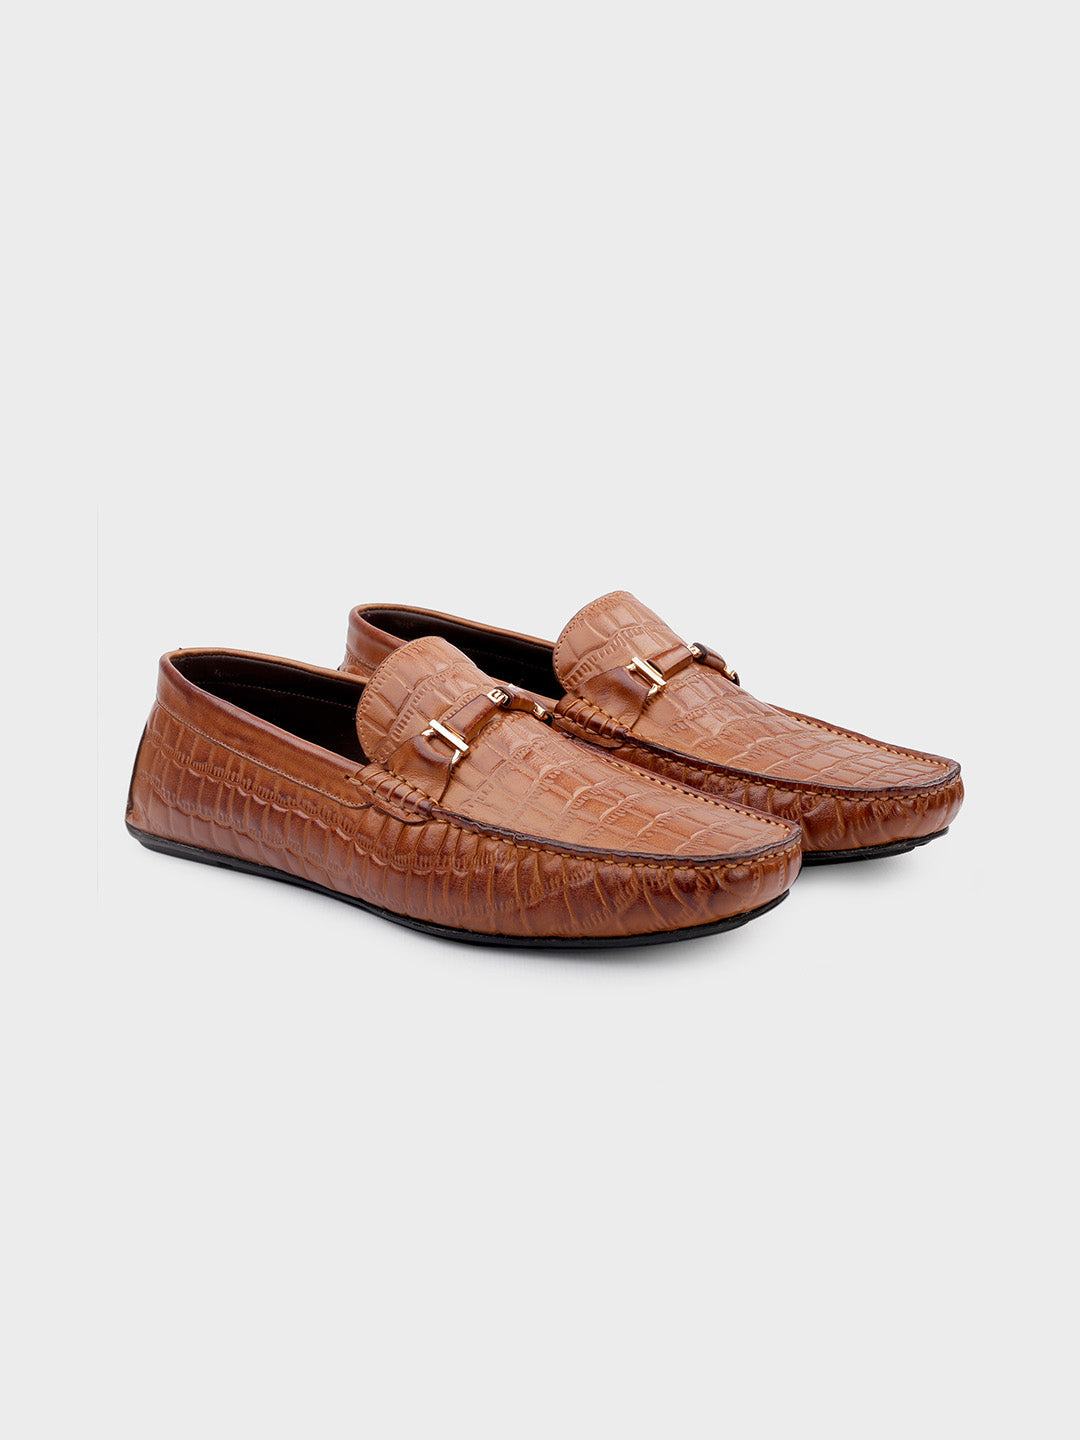 Men's Tan Leather Loafer Shoes